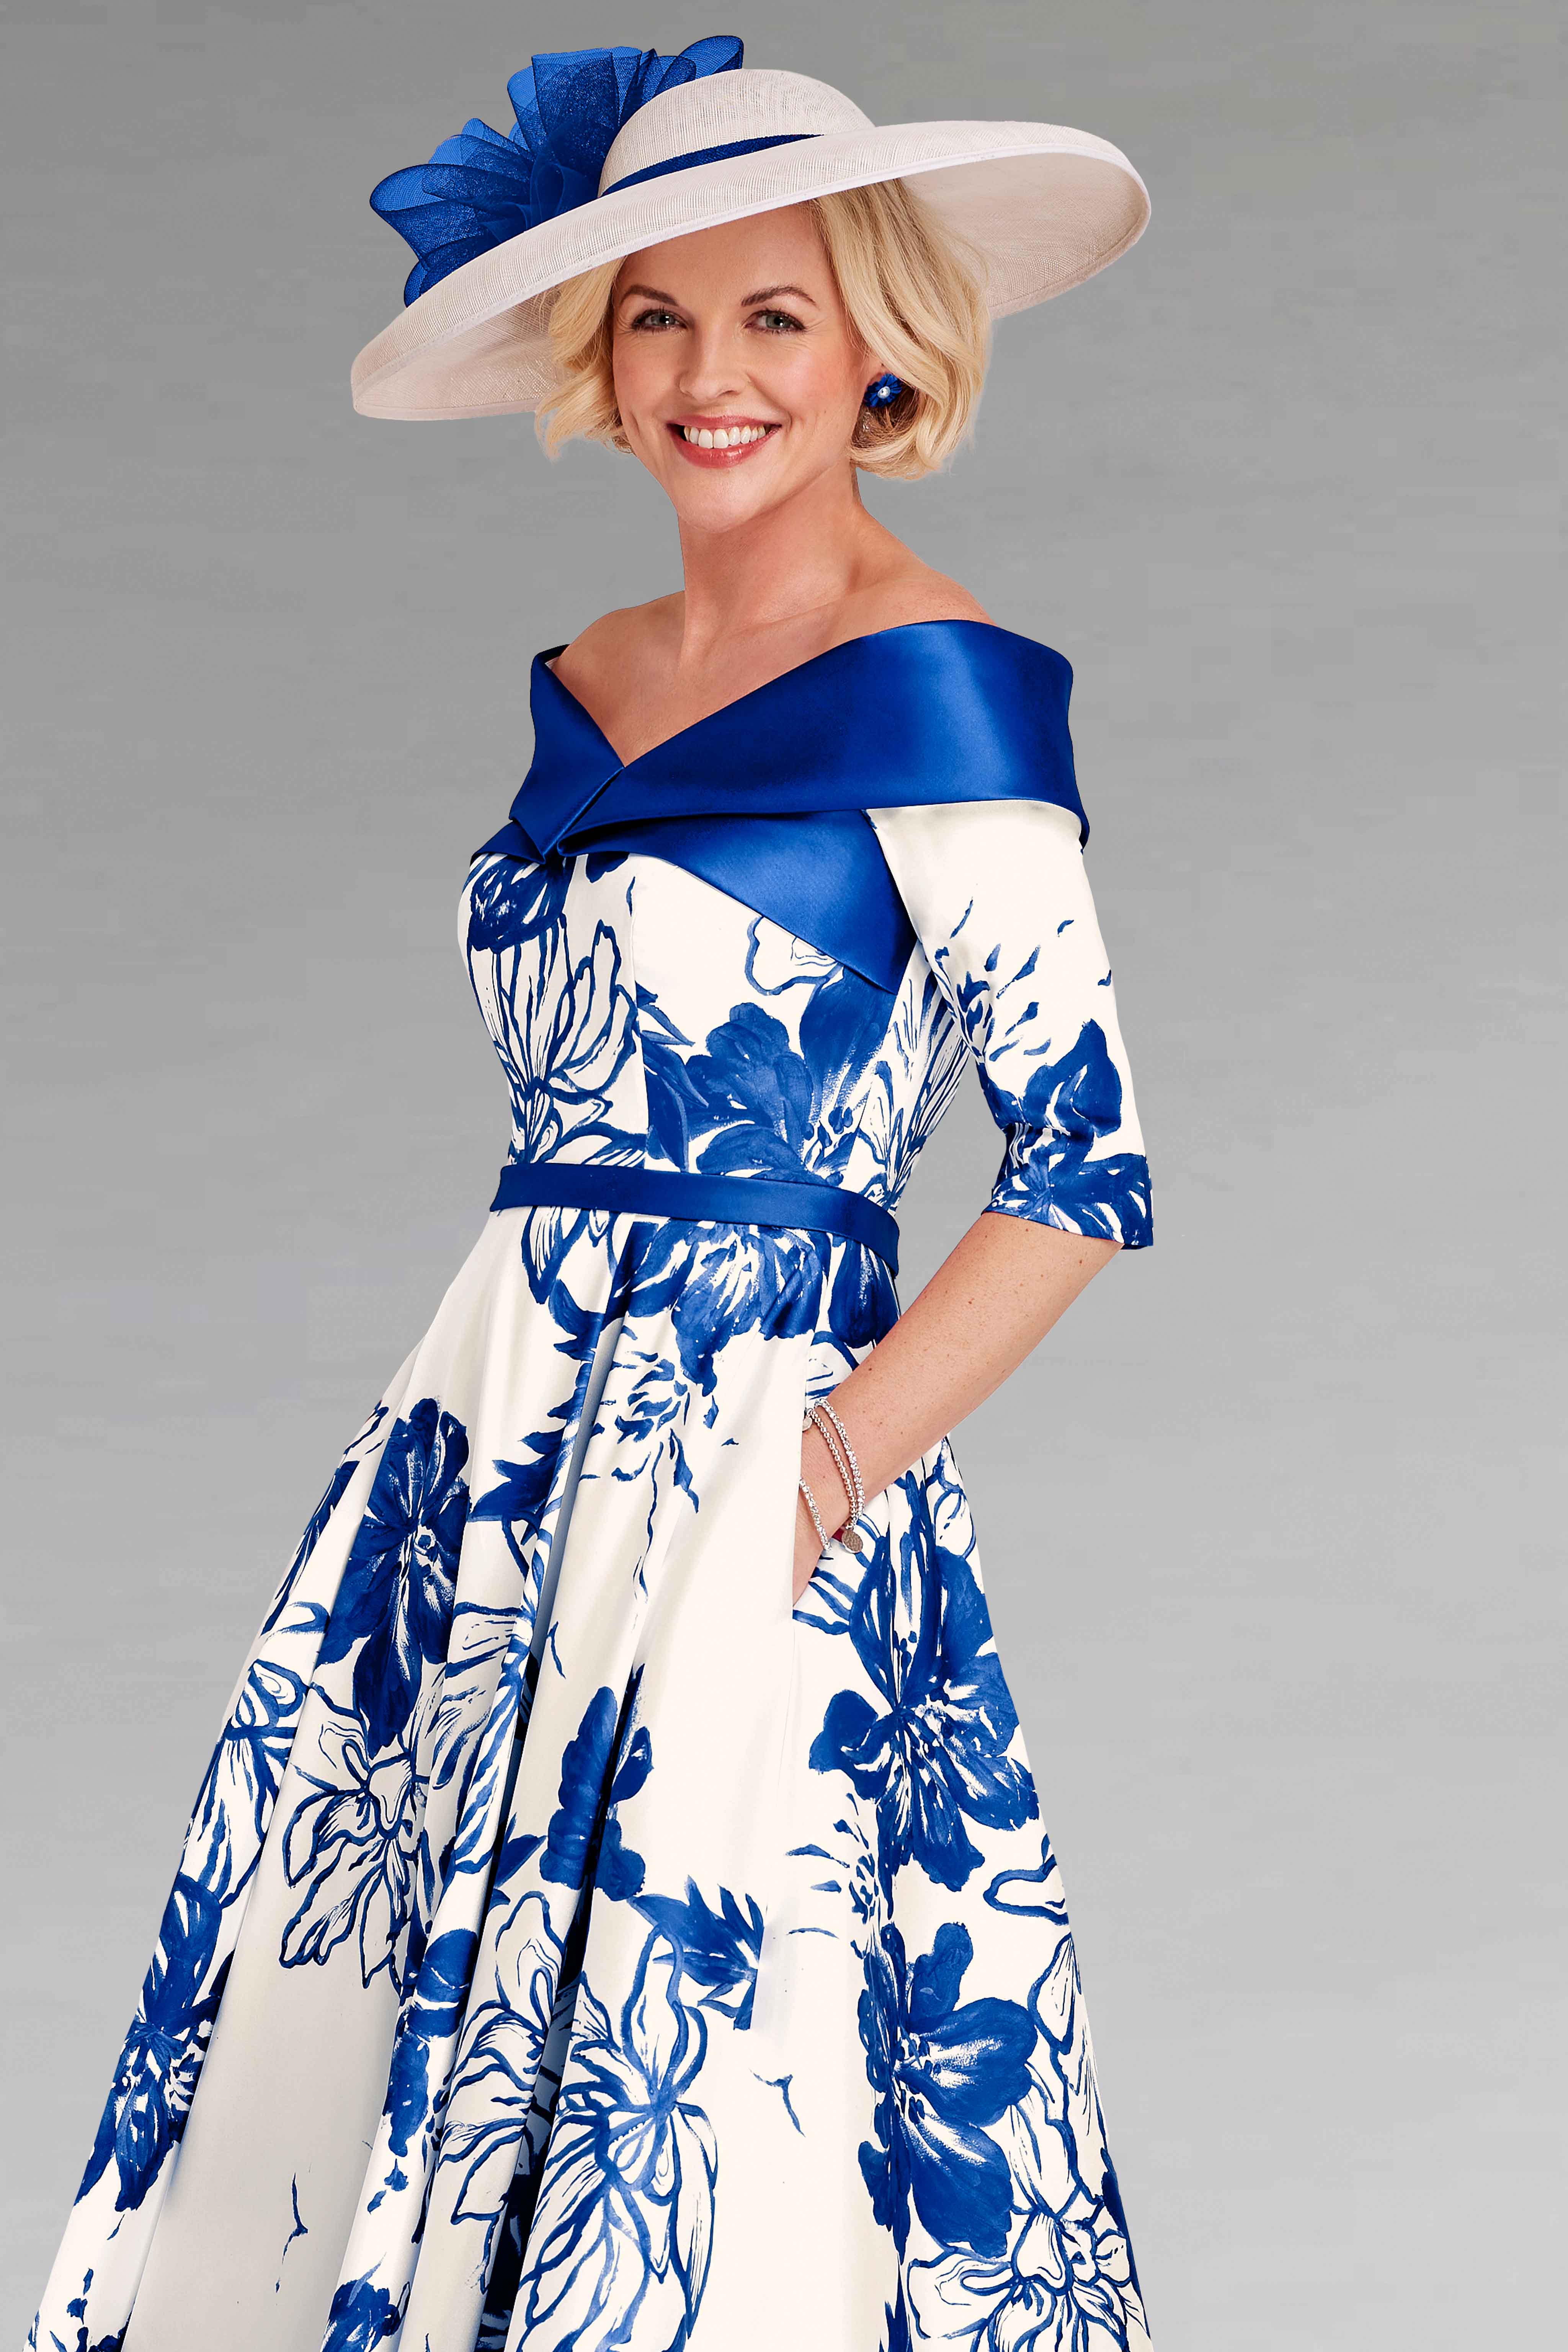 Dipped Hem Printed Dress With Sleeves. 66418 - Catherines of Partick